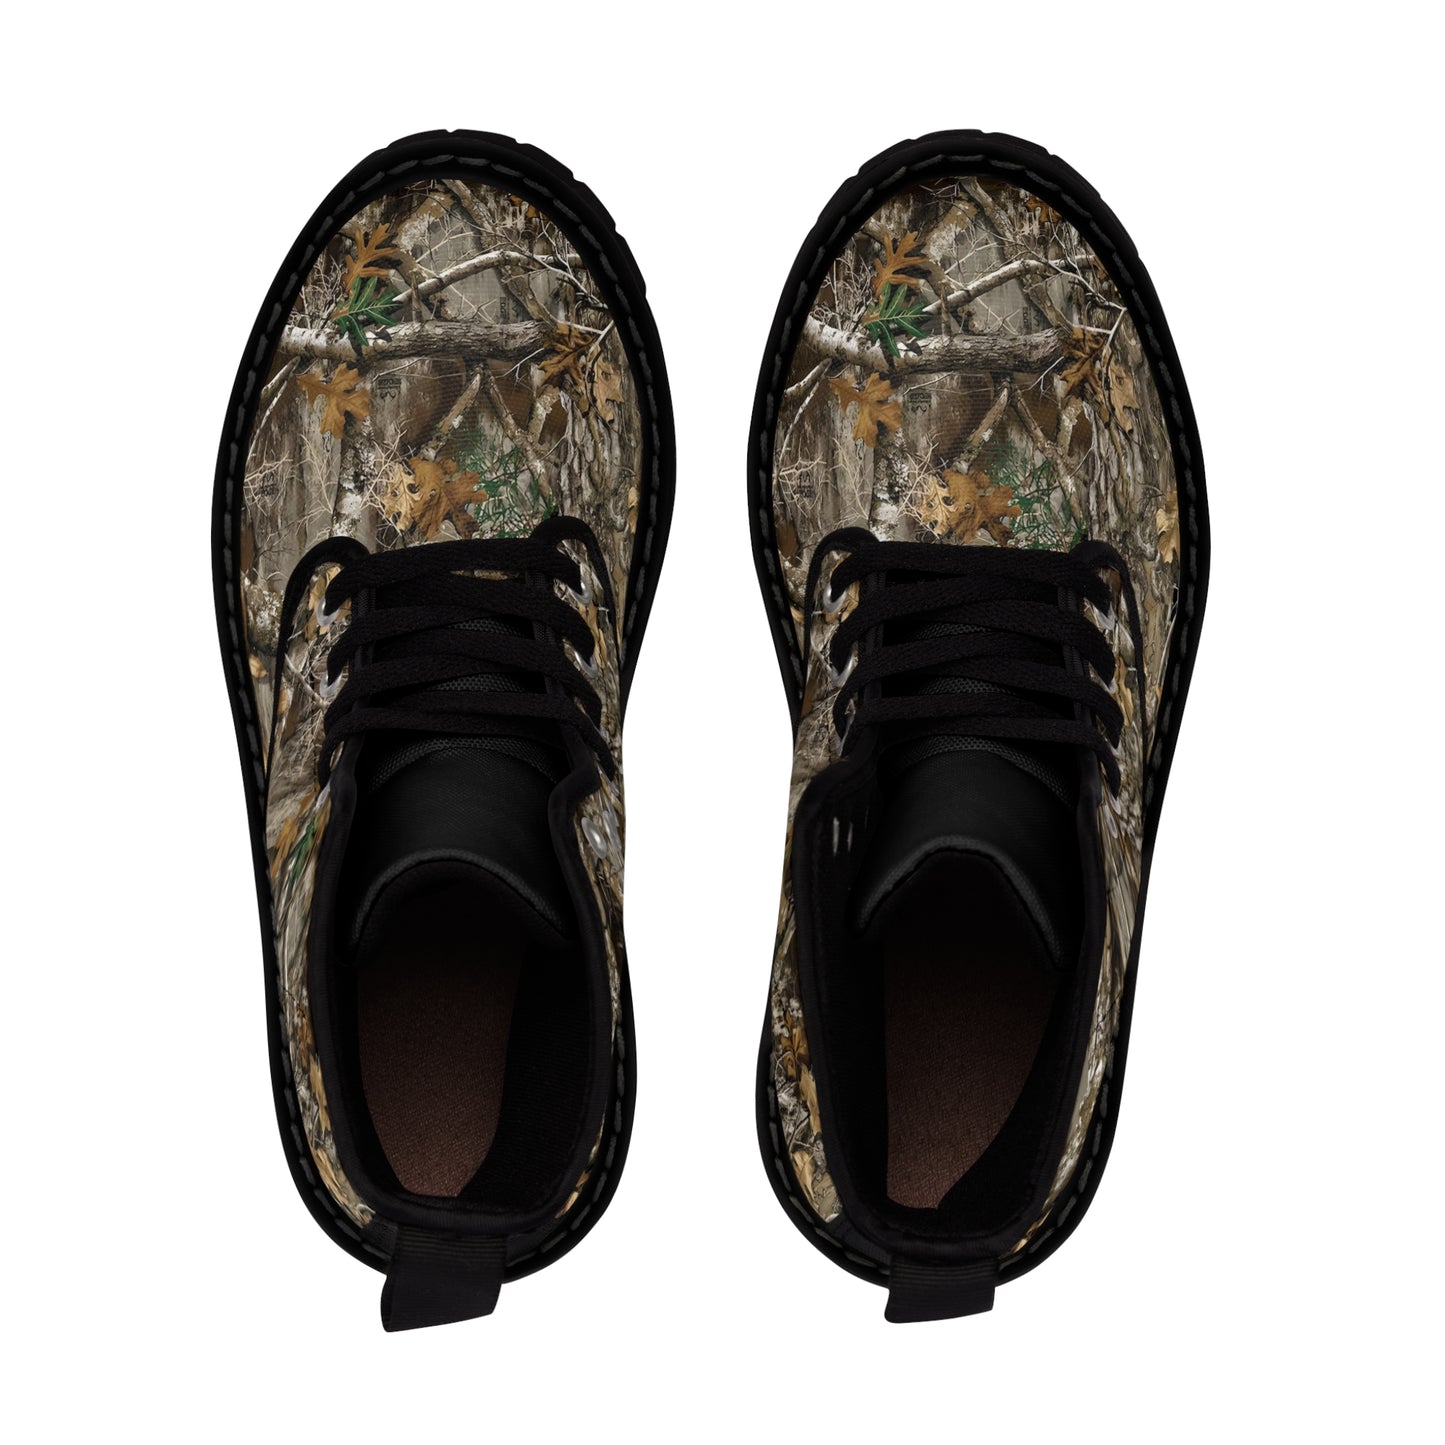 Men's Camouflage RealTree Canvas Boots